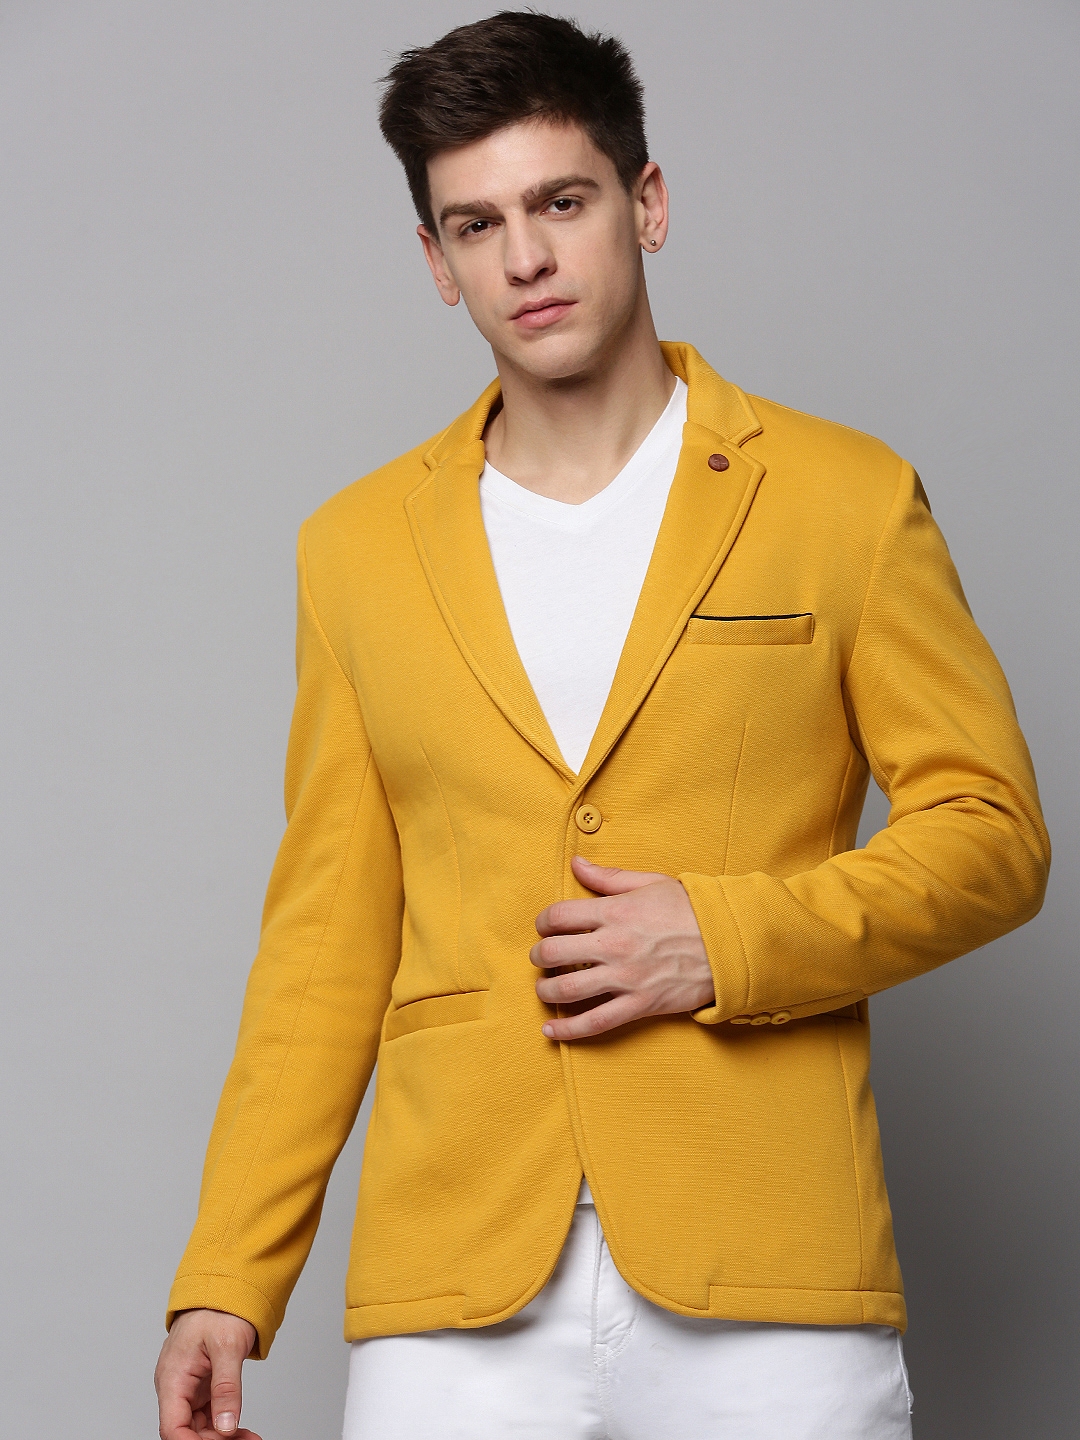 SHOWOFF Men's Notched Lapel Solid Yellow Open Front Blazer